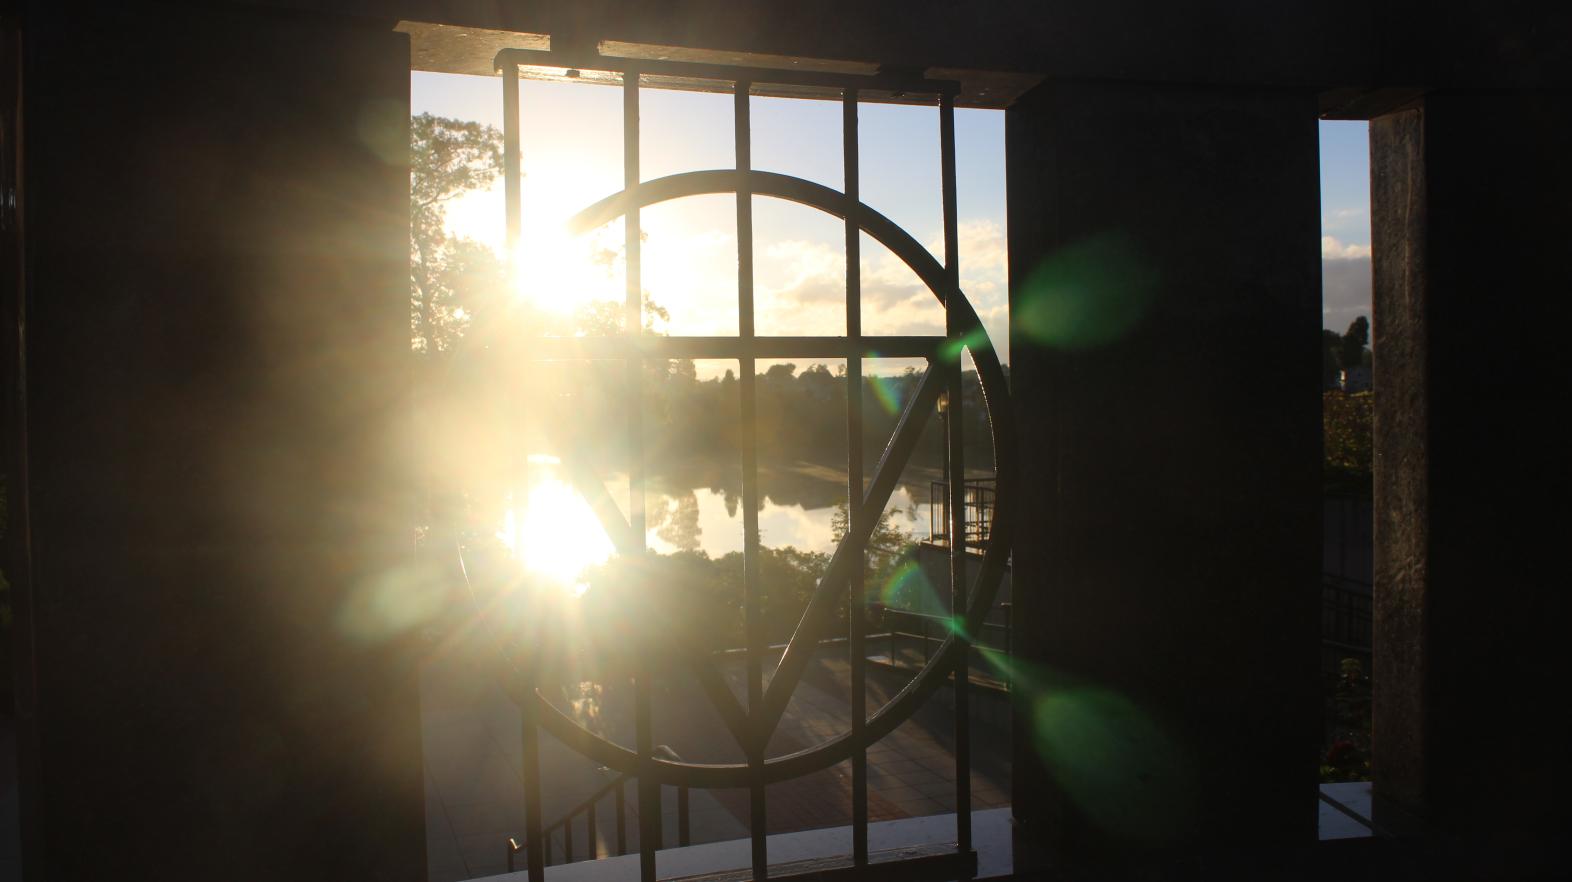 Our Gulick triangle frames the sun rising over Lake Massasoit in this photograph from graduate student Paige Moran.